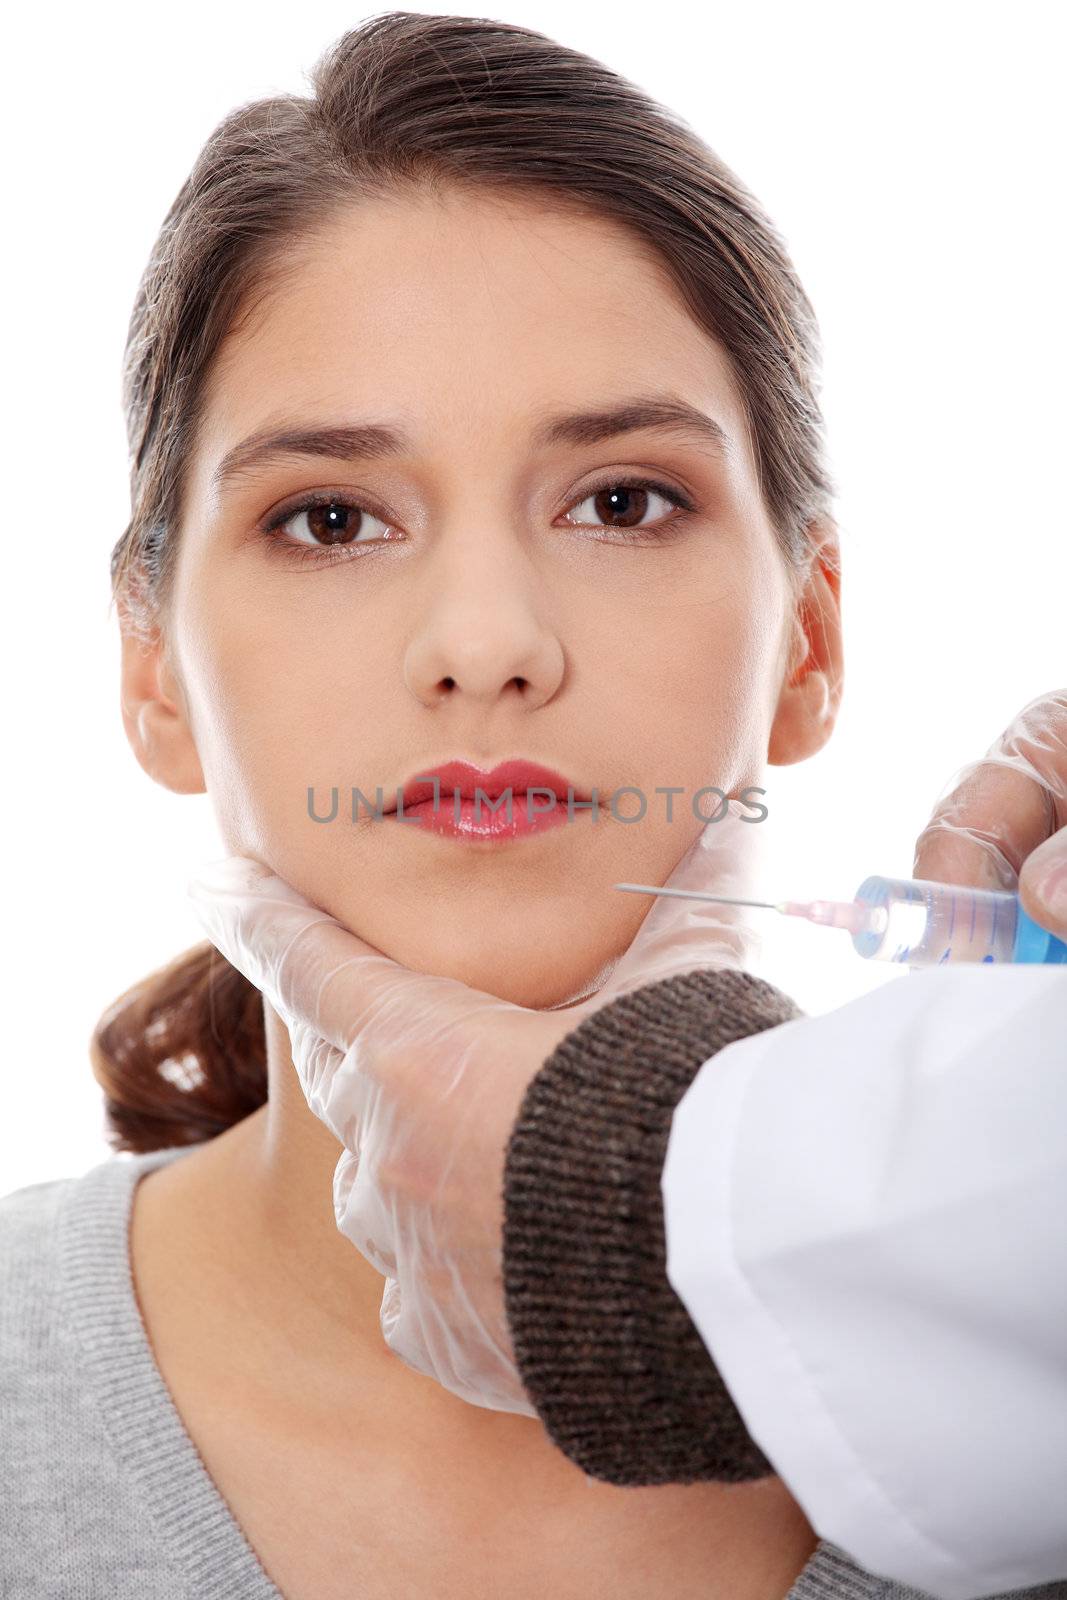 Plastic surgeons giving botox injection in female skin. Isolated on white